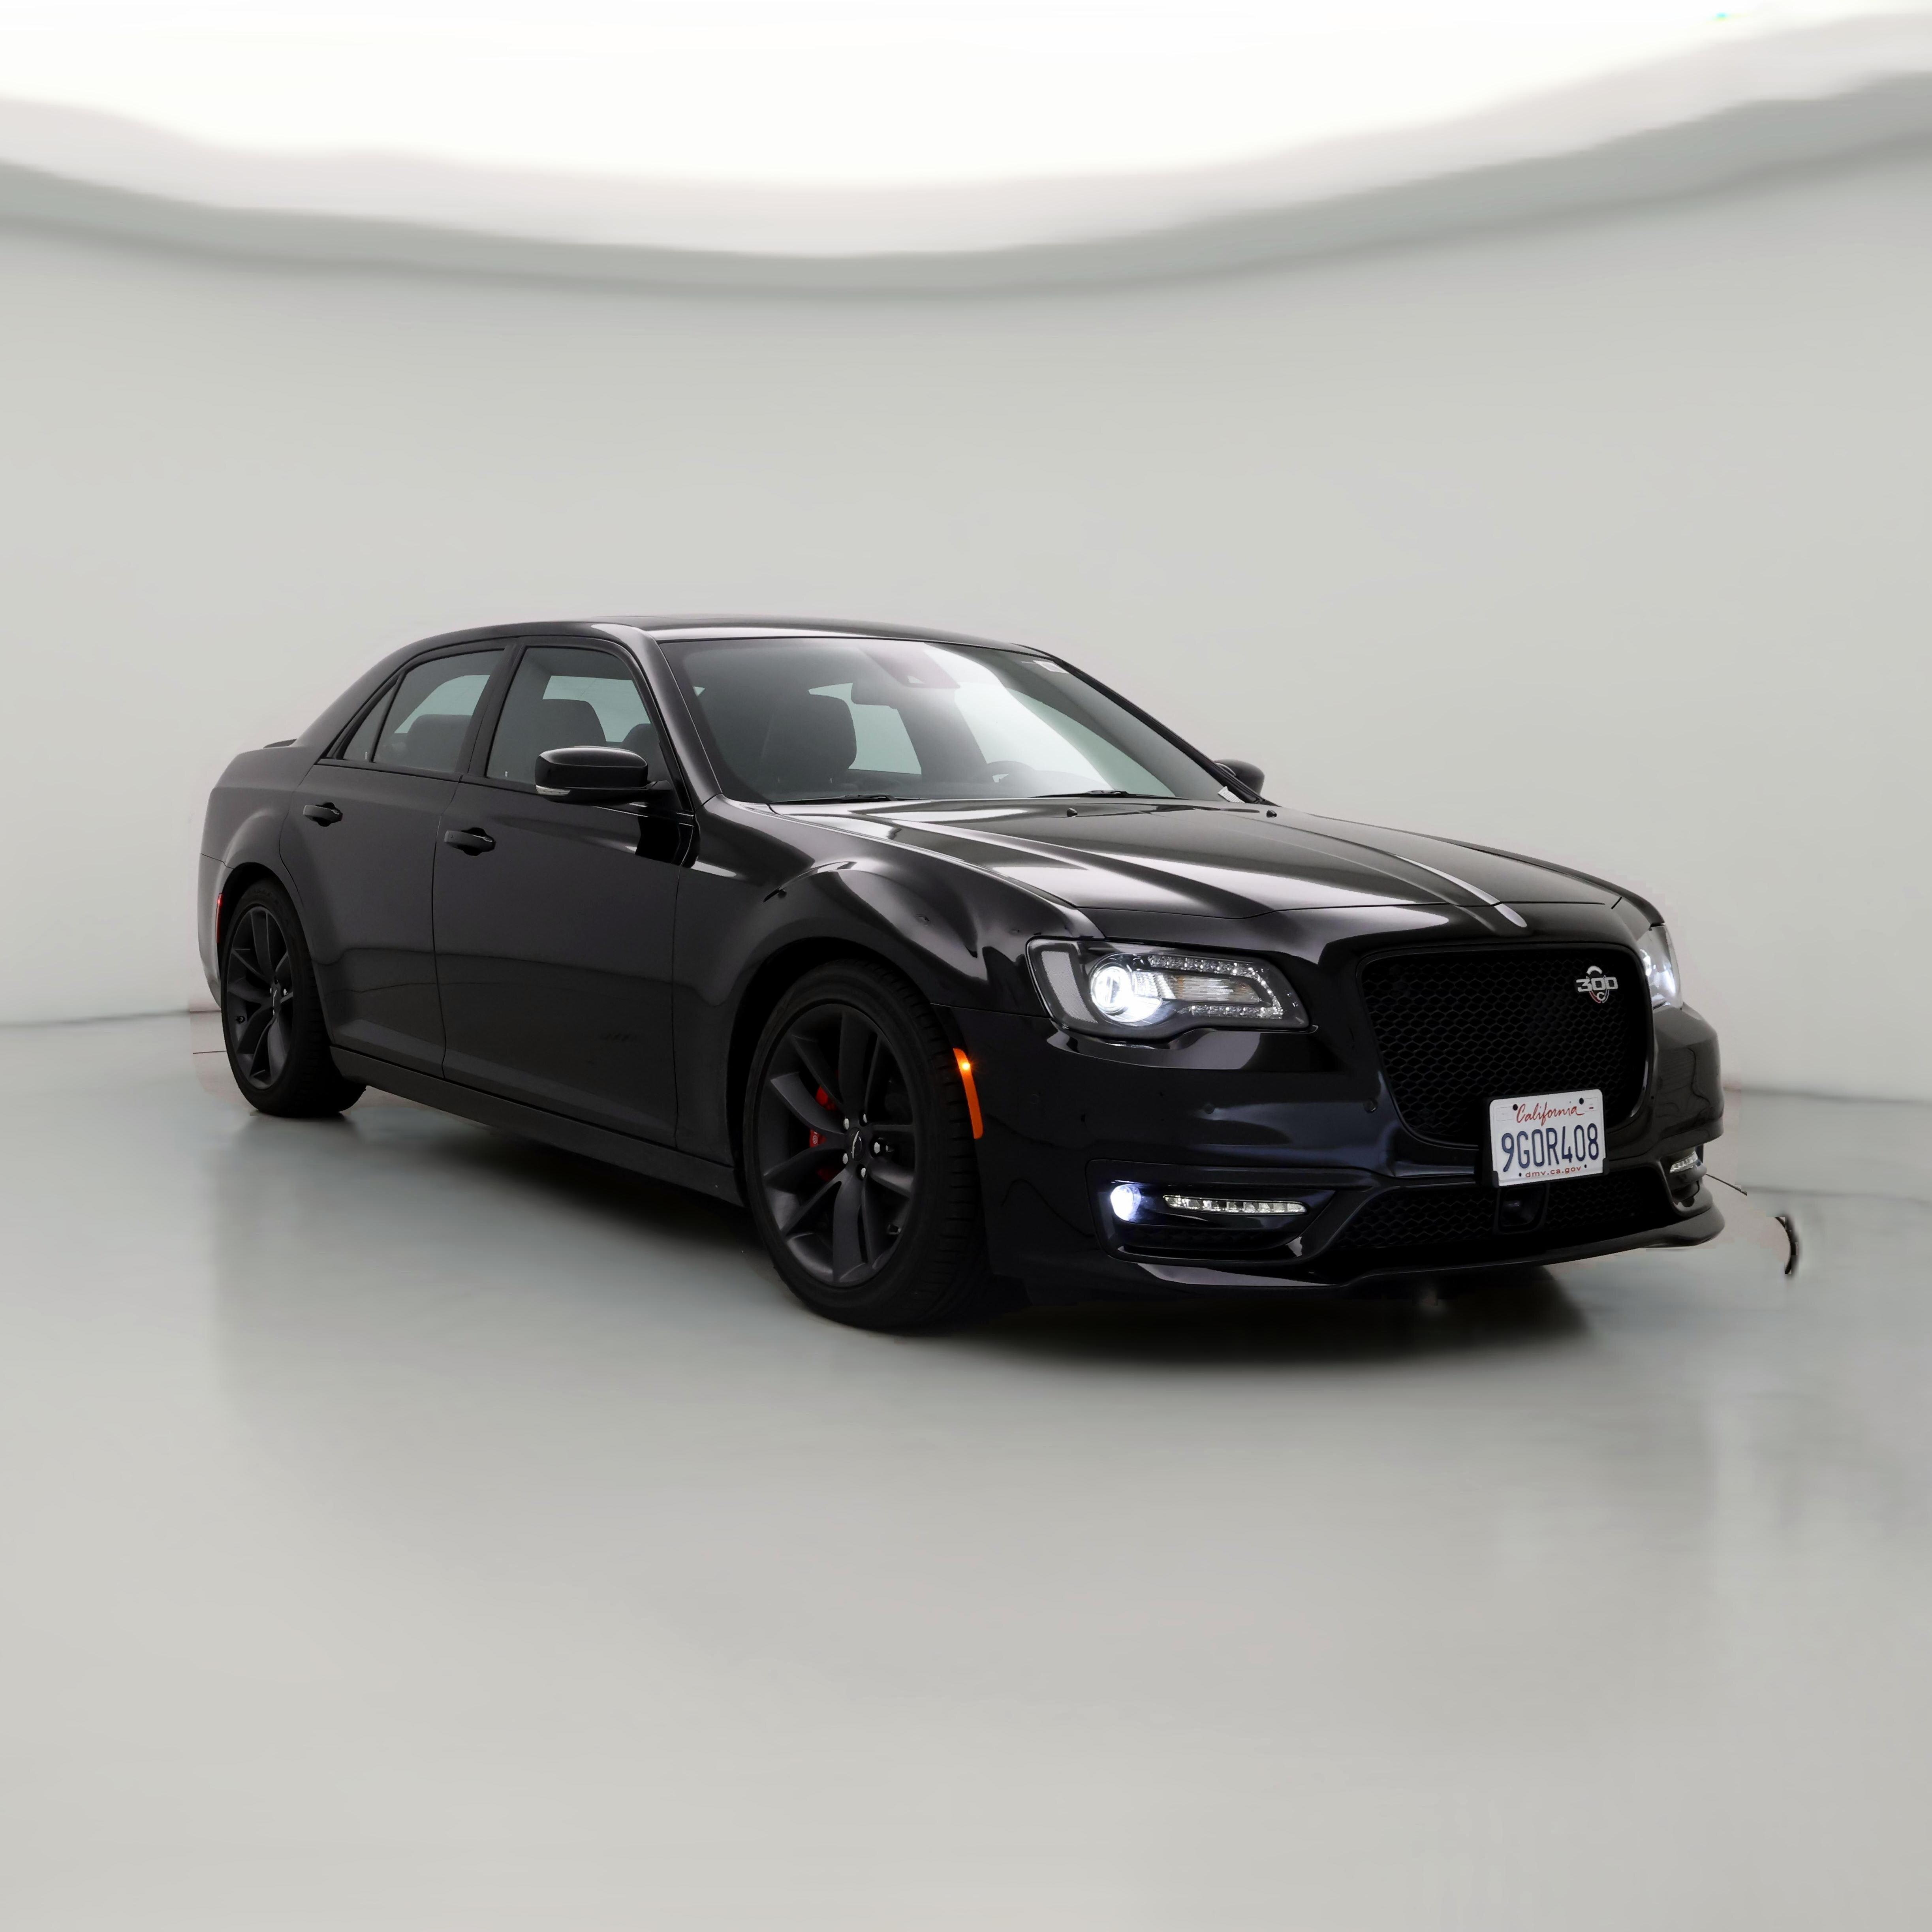 Used Chrysler 300 in Los Angeles, CA for Sale